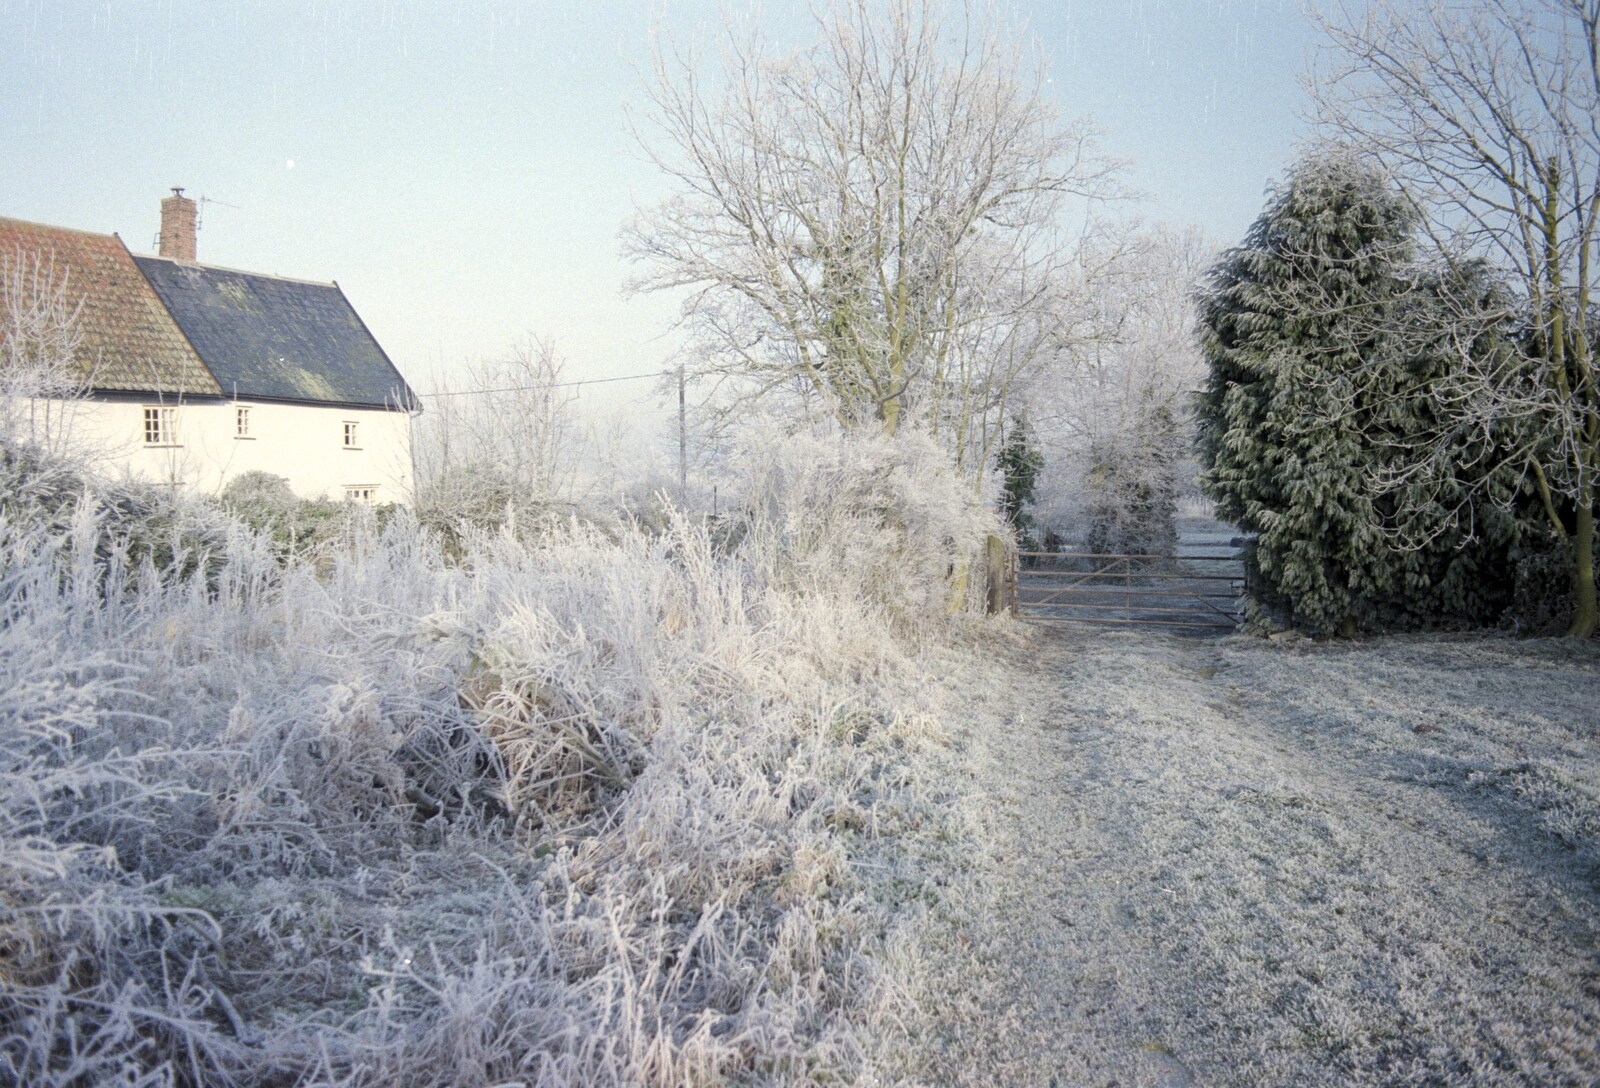 The Stables Gate and Old Man Cunningham's house from A Frosty Morning, Suffolk and Norfolk - 15th December 1991